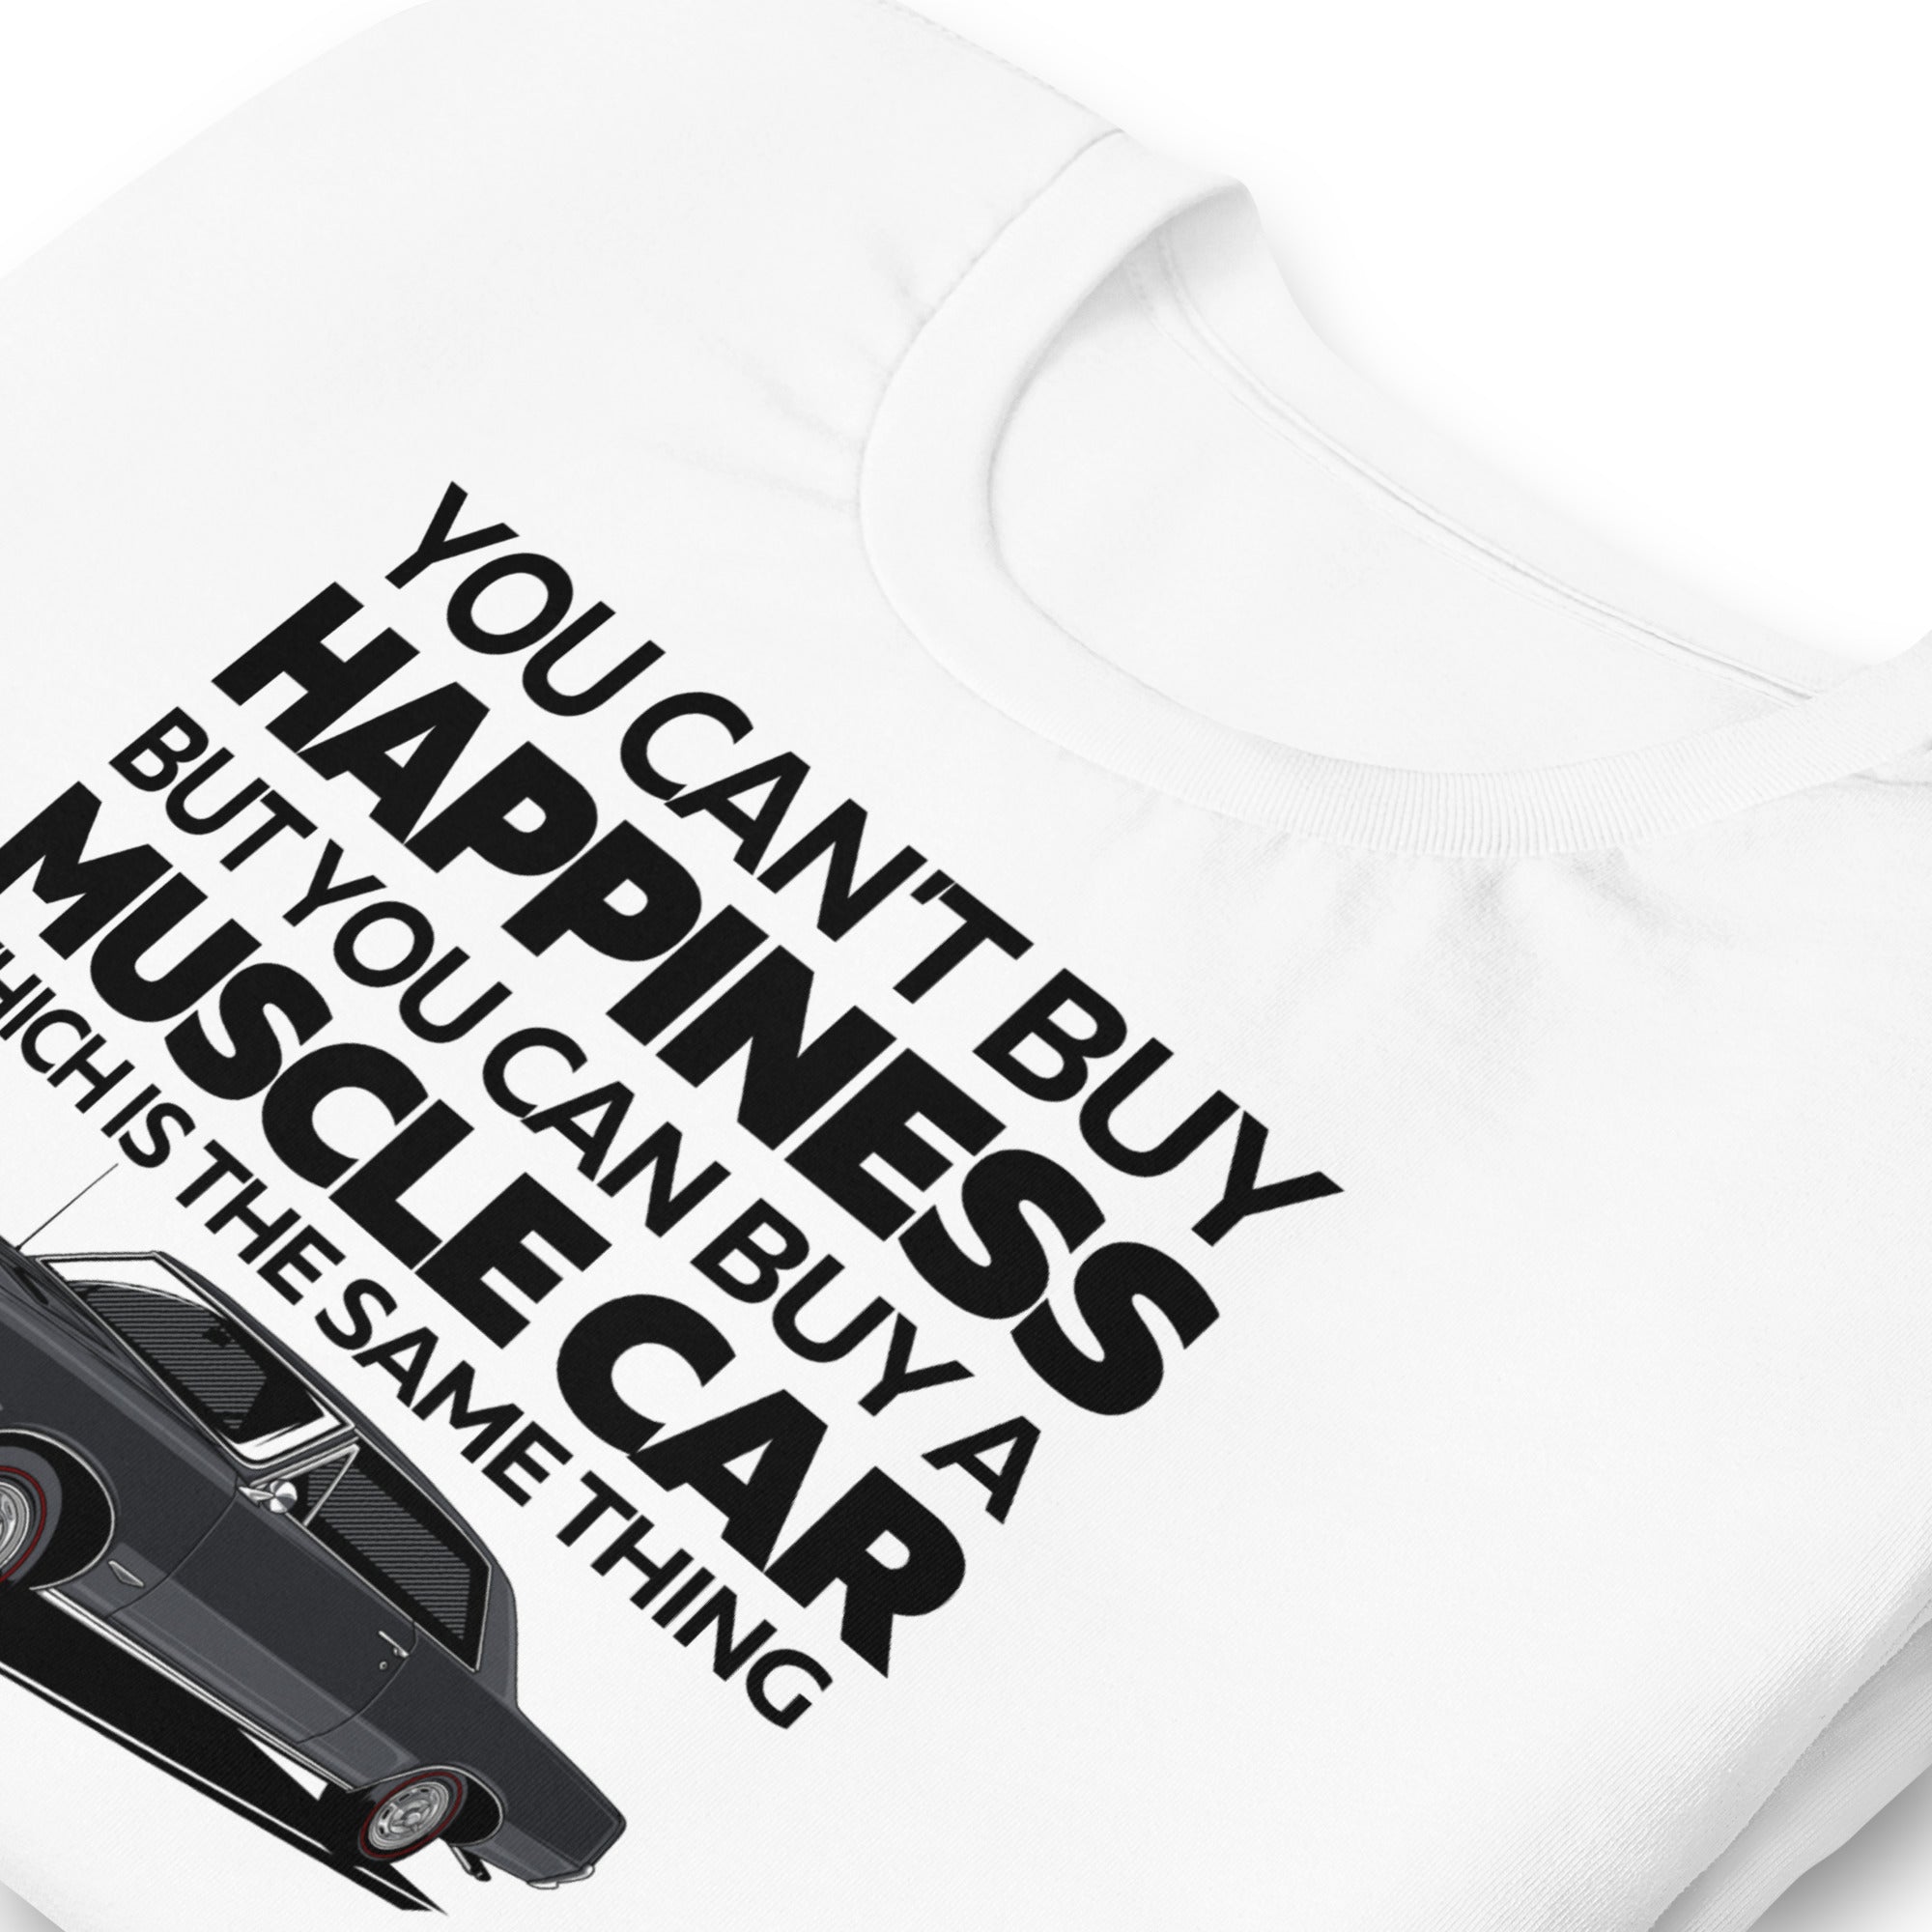 You Can't Buy Happiness - Muscle Car